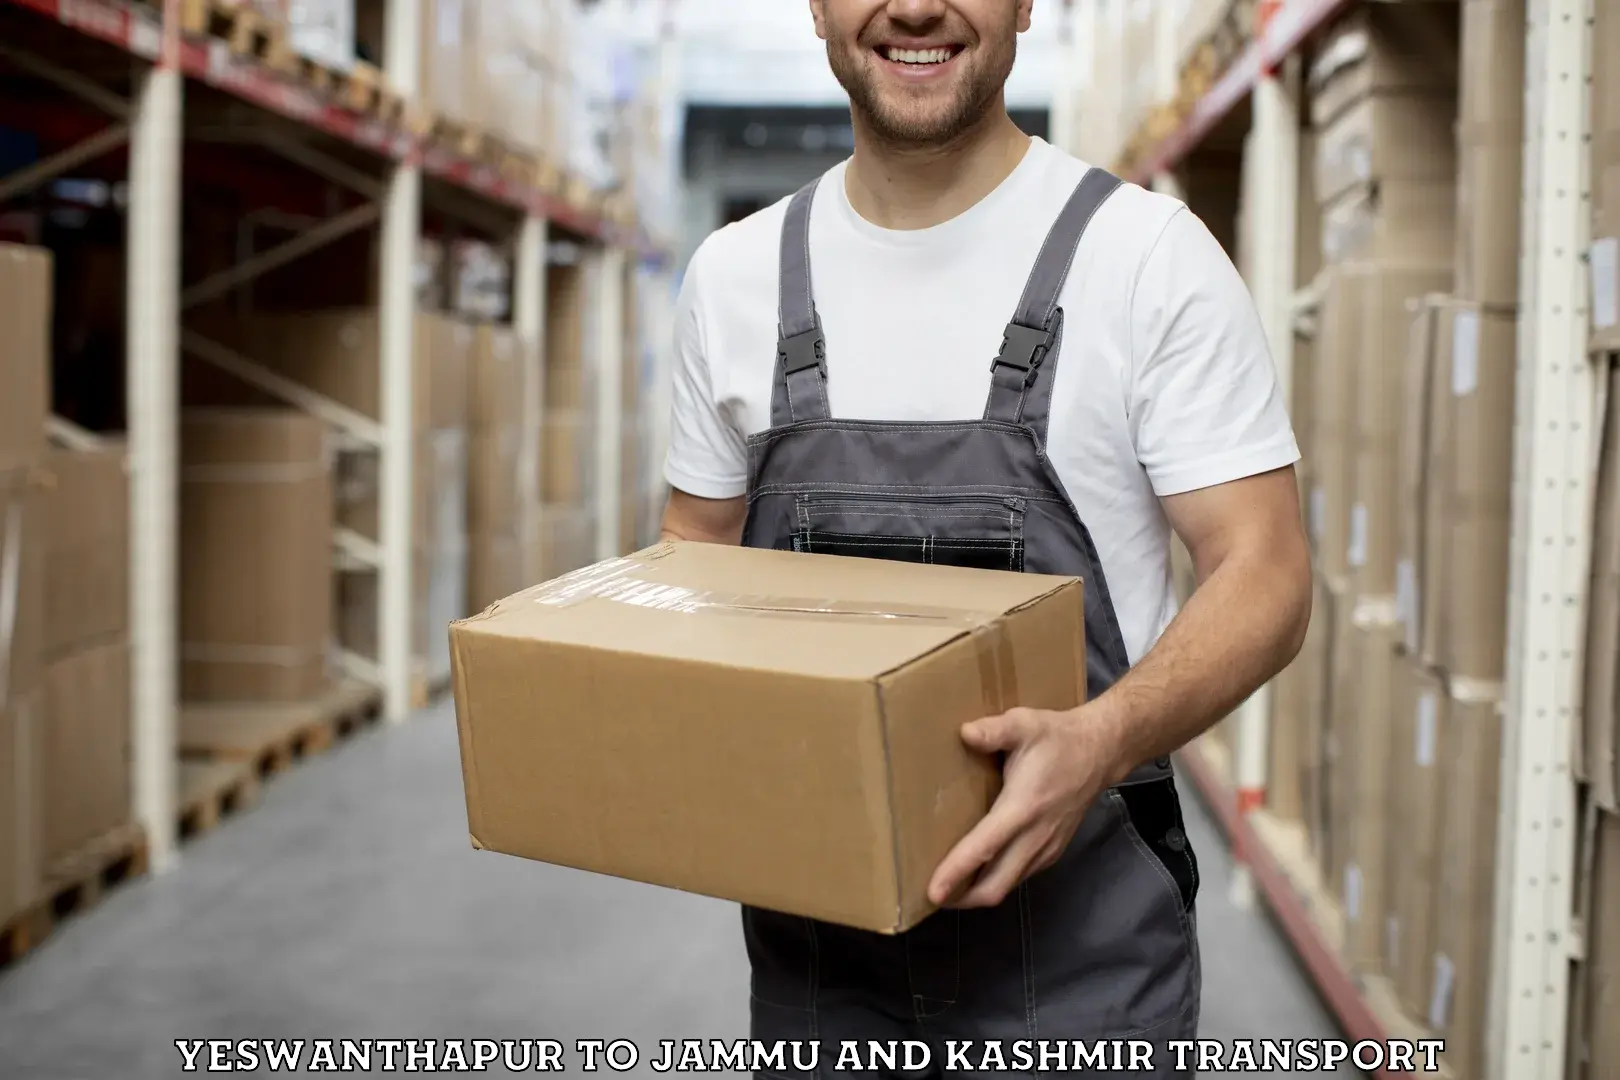 Furniture transport service Yeswanthapur to Jammu and Kashmir